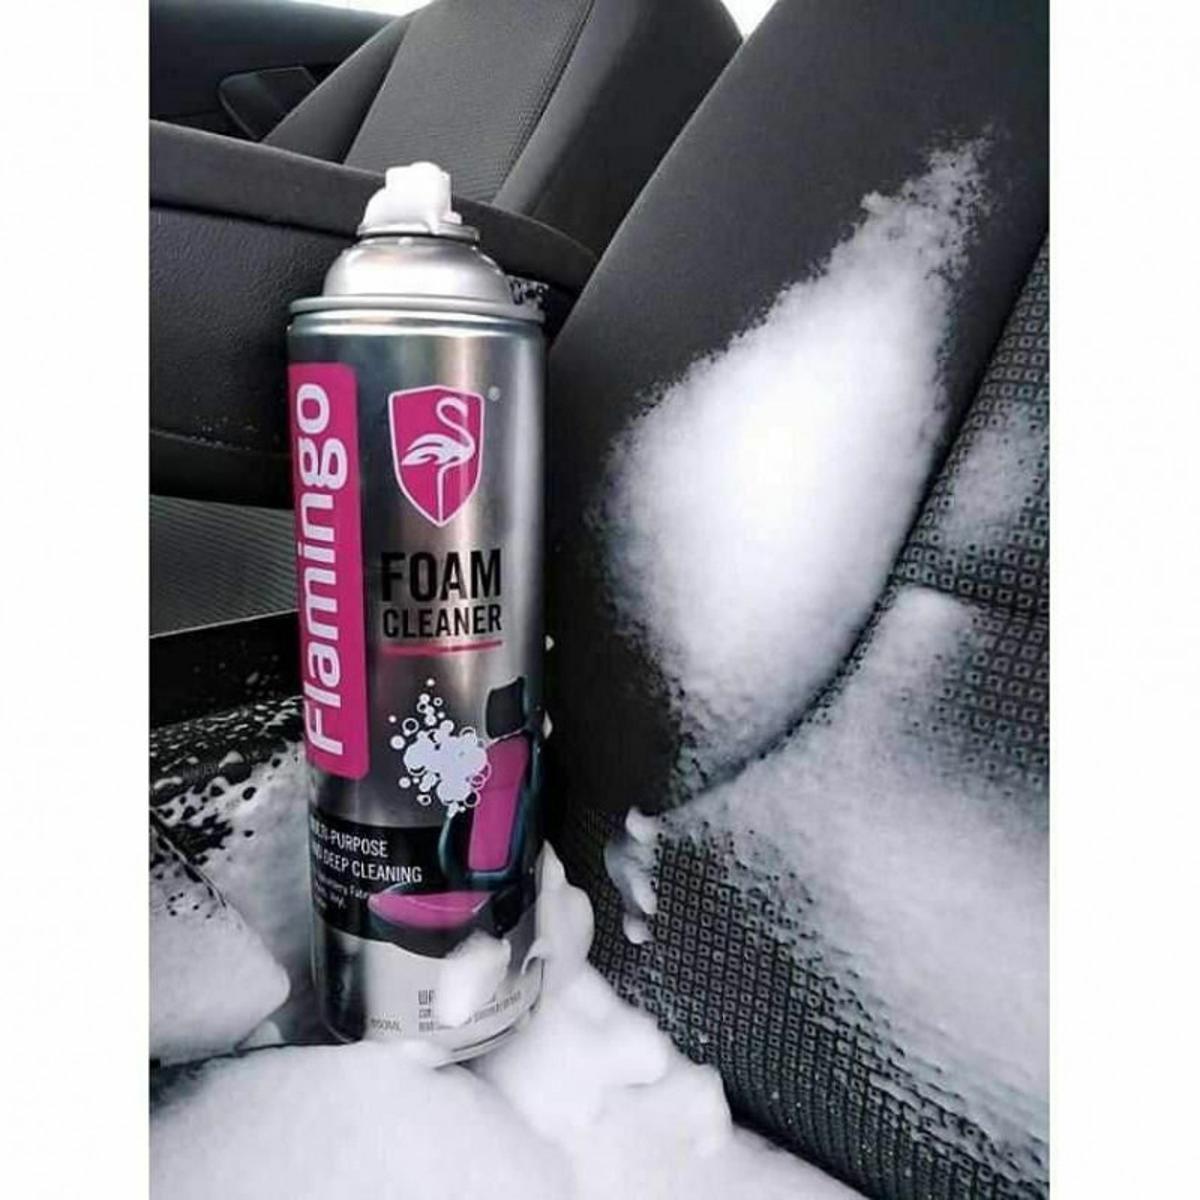 Flamingo's Latest Foam Cleaner For Cars